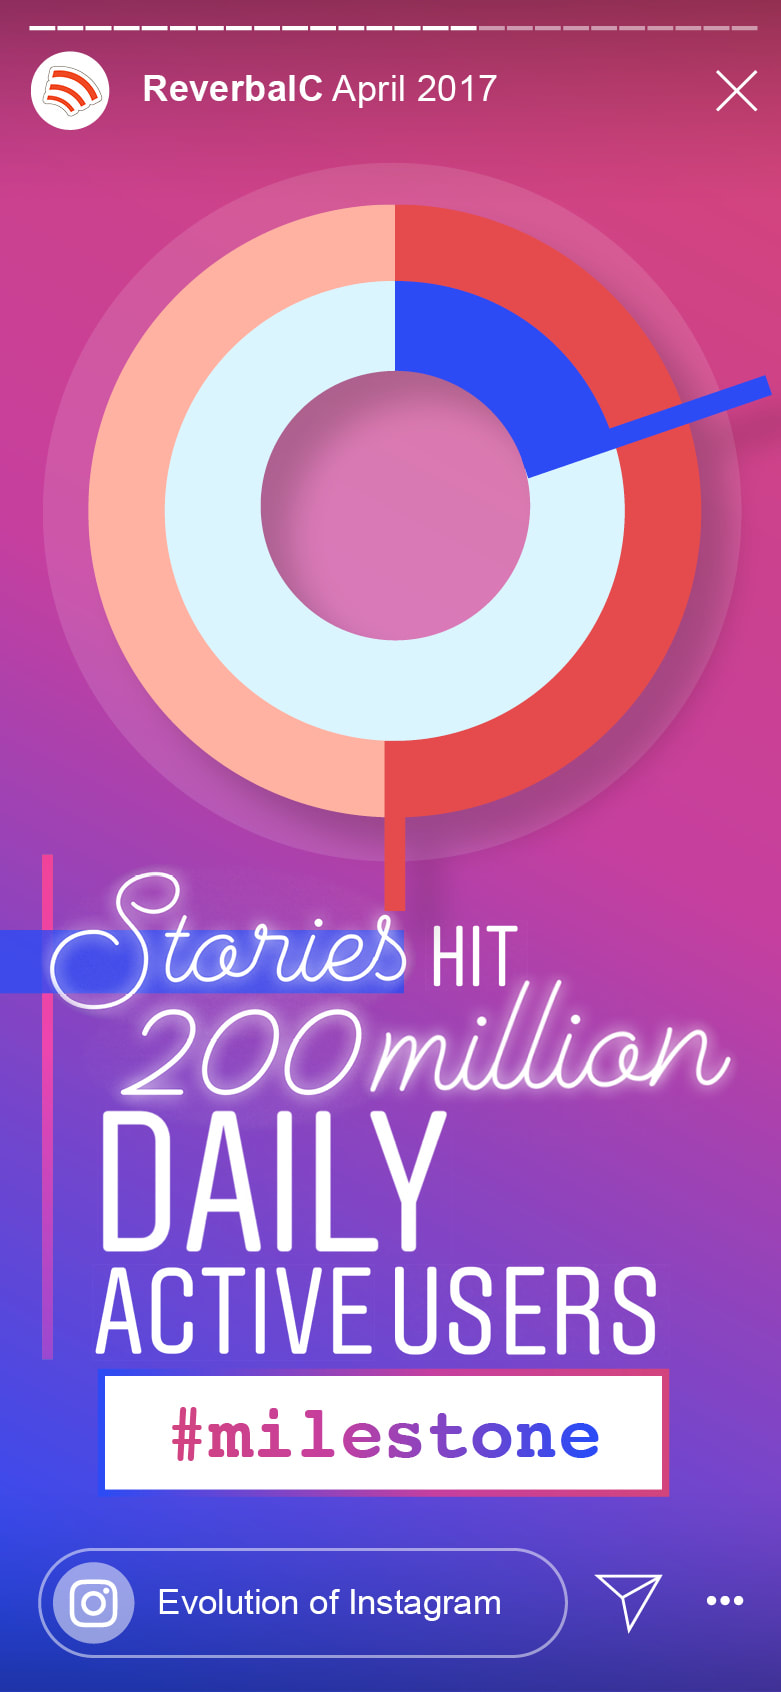 When did Instagram Stories hit 200 million daily active users?